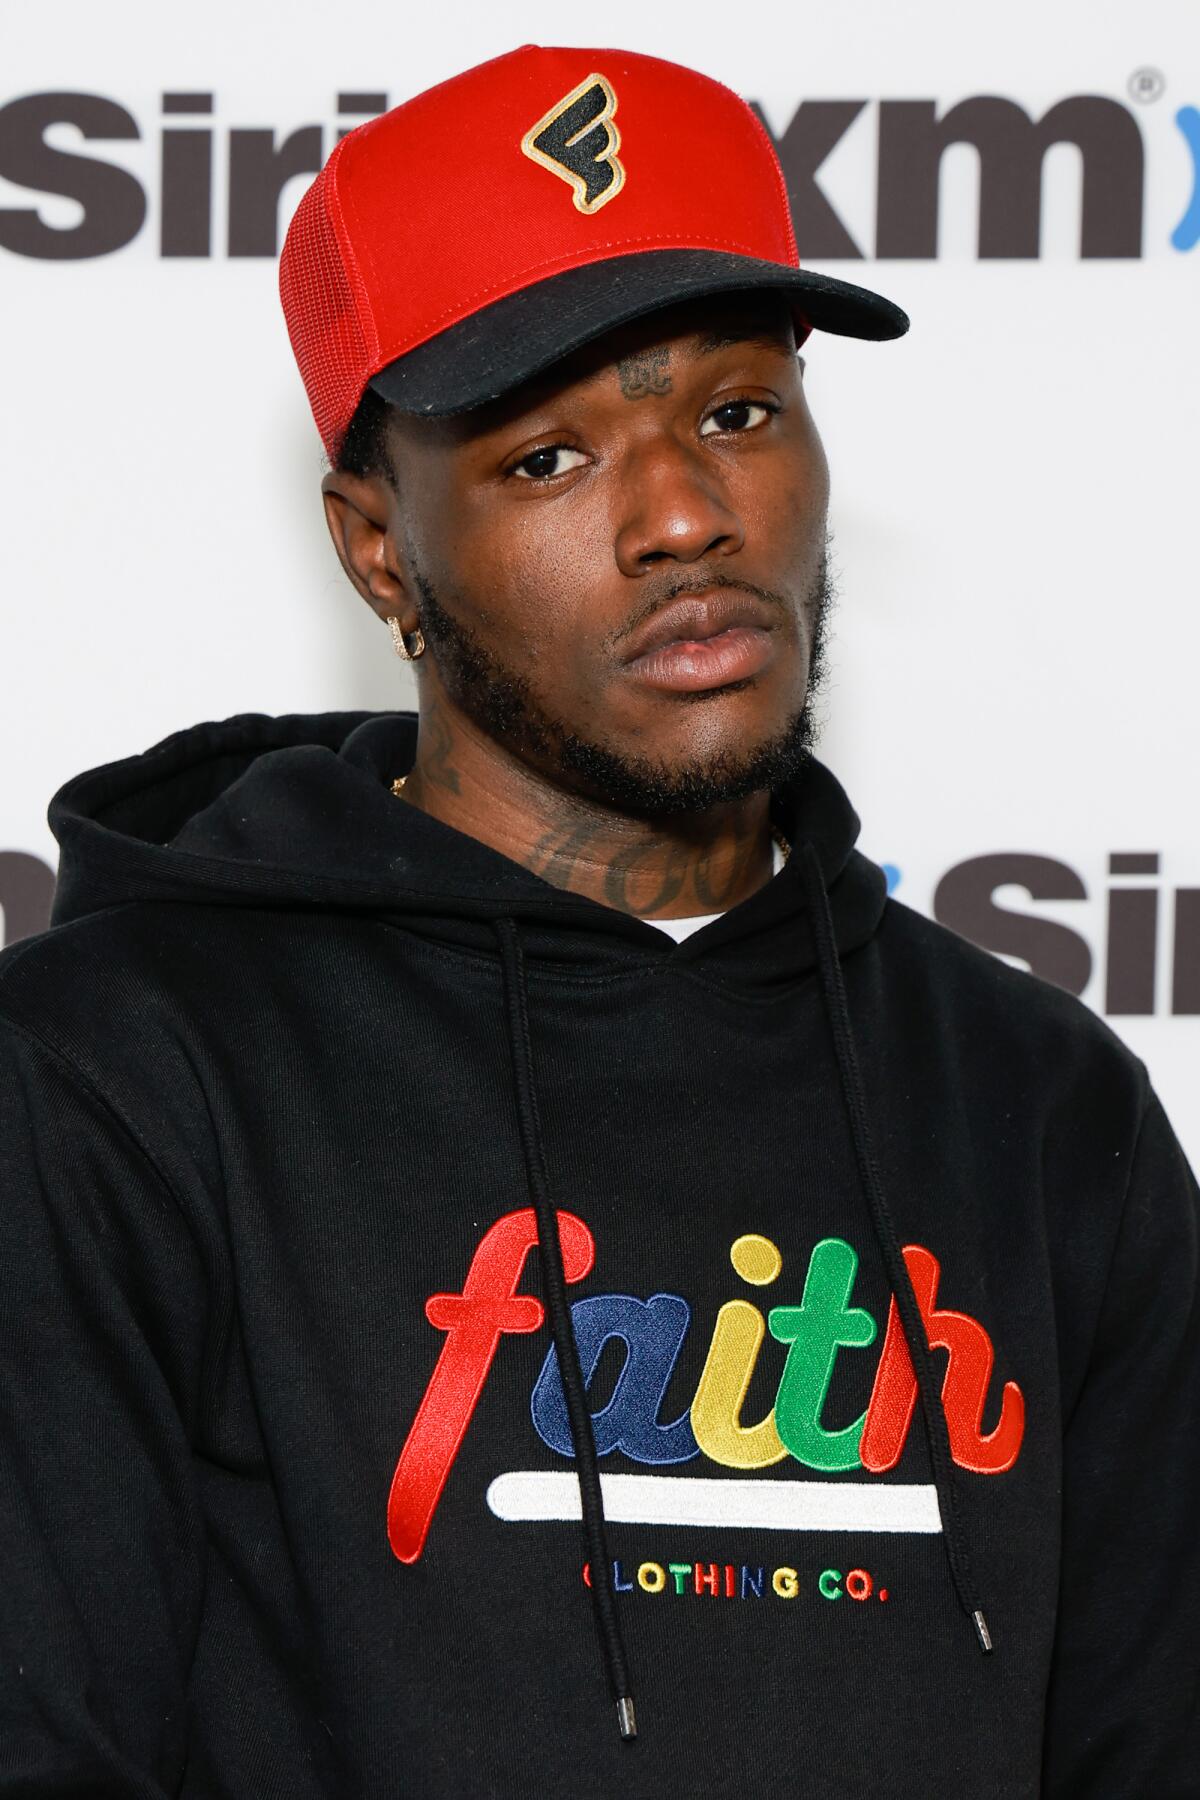 DC Young Fly is posing with a serious face while wearing a red baseball cap and a black hoodie with multicolor "faith."